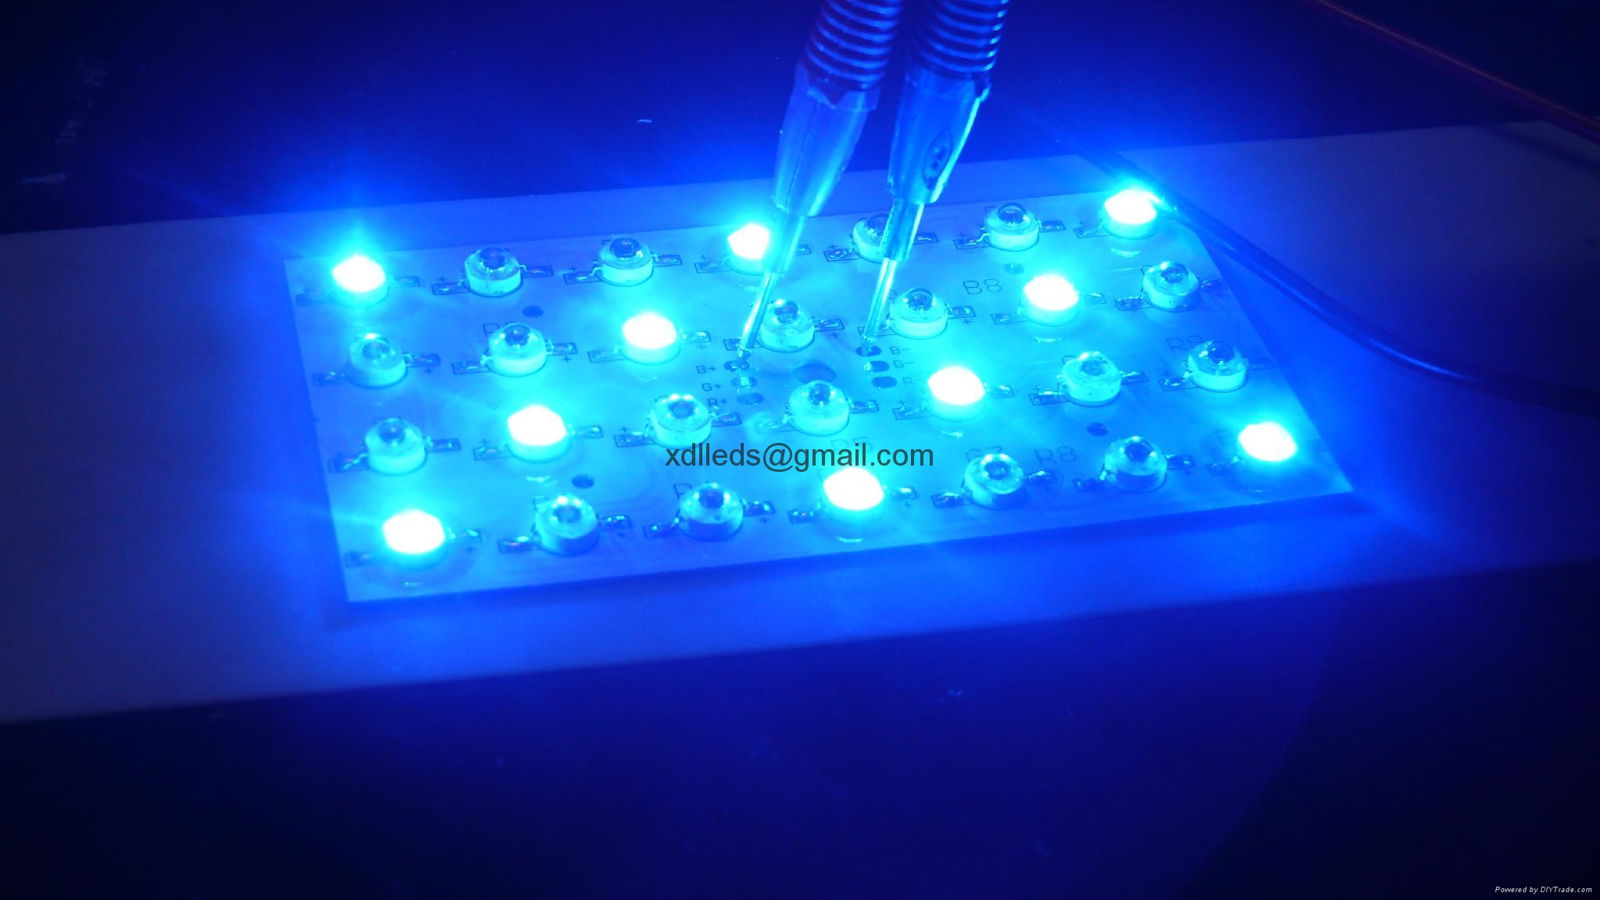 DC12V 28W PCB with 1 watt RGB Led soldered with Lens reflector 5